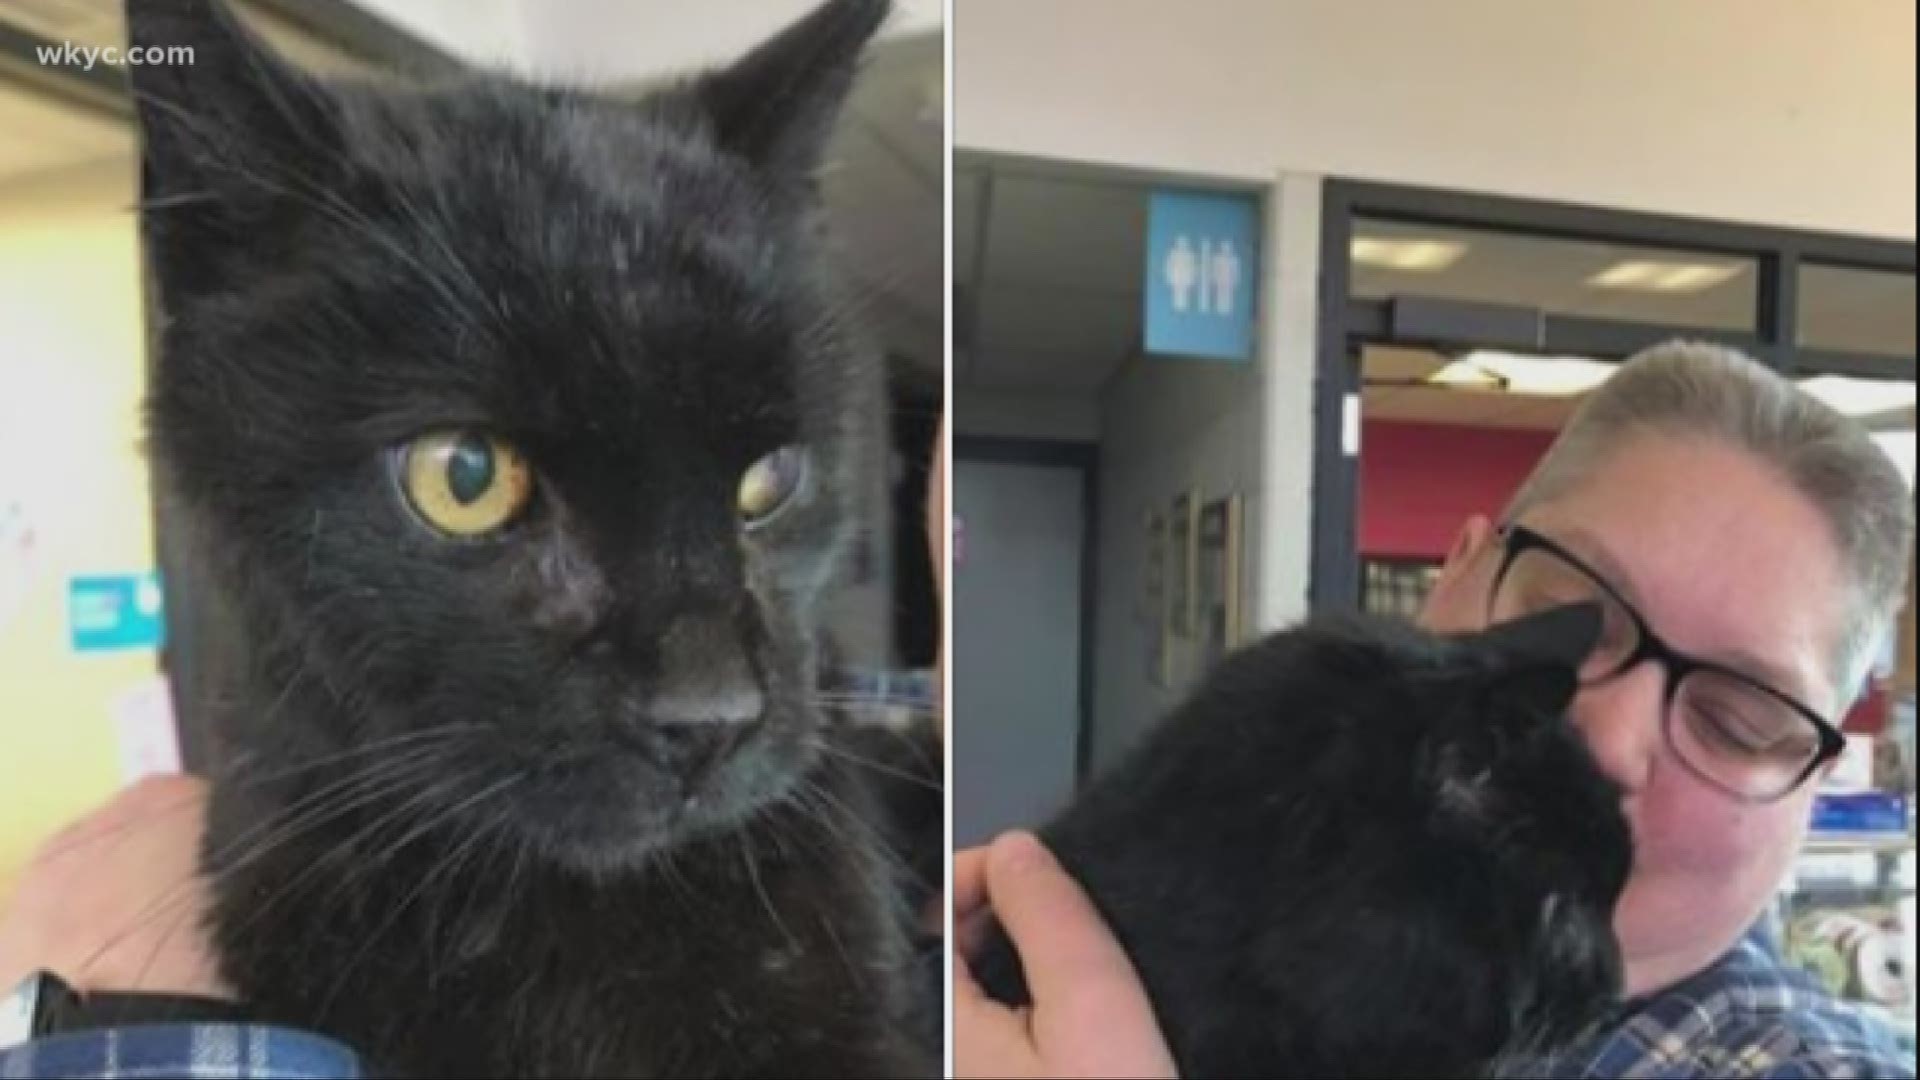 April 17, 2019: Peatie the cat has been around for 10 years, lounging on furniture and entertaining customers at the Westlake store. Peatie has gained a loyal fan base and a very important job. Six months ago, though, Peatie took himself for a walk and didn’t come back.